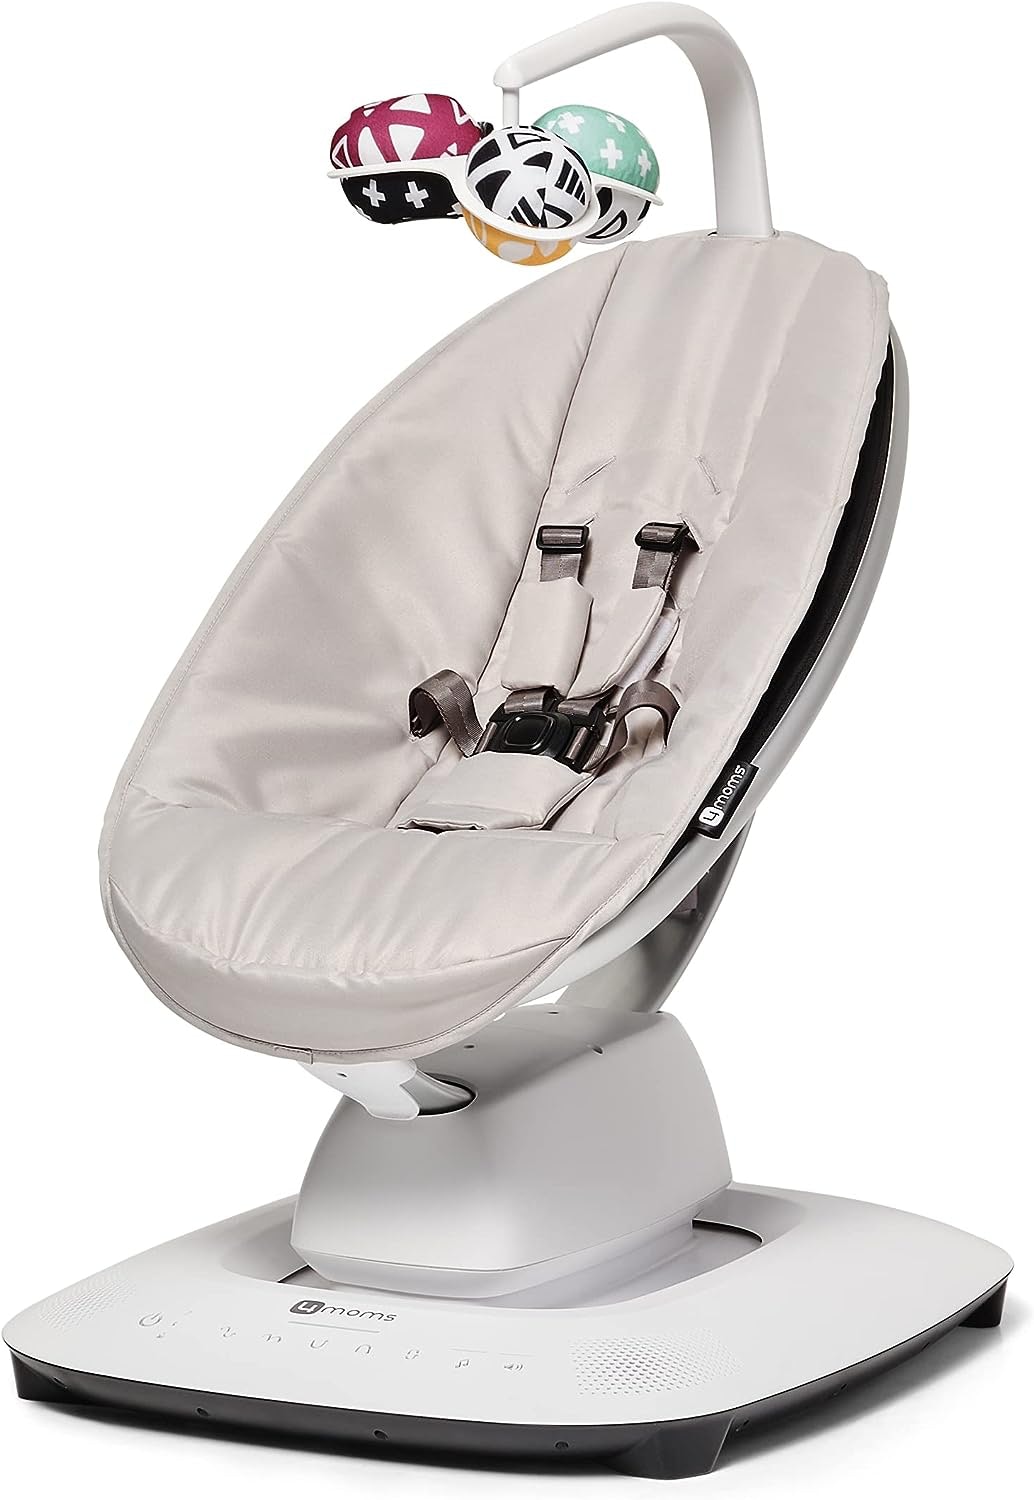 4-reasons-why-youll-want-to-add-the-mamaroo-baby-swing-to-your-registry